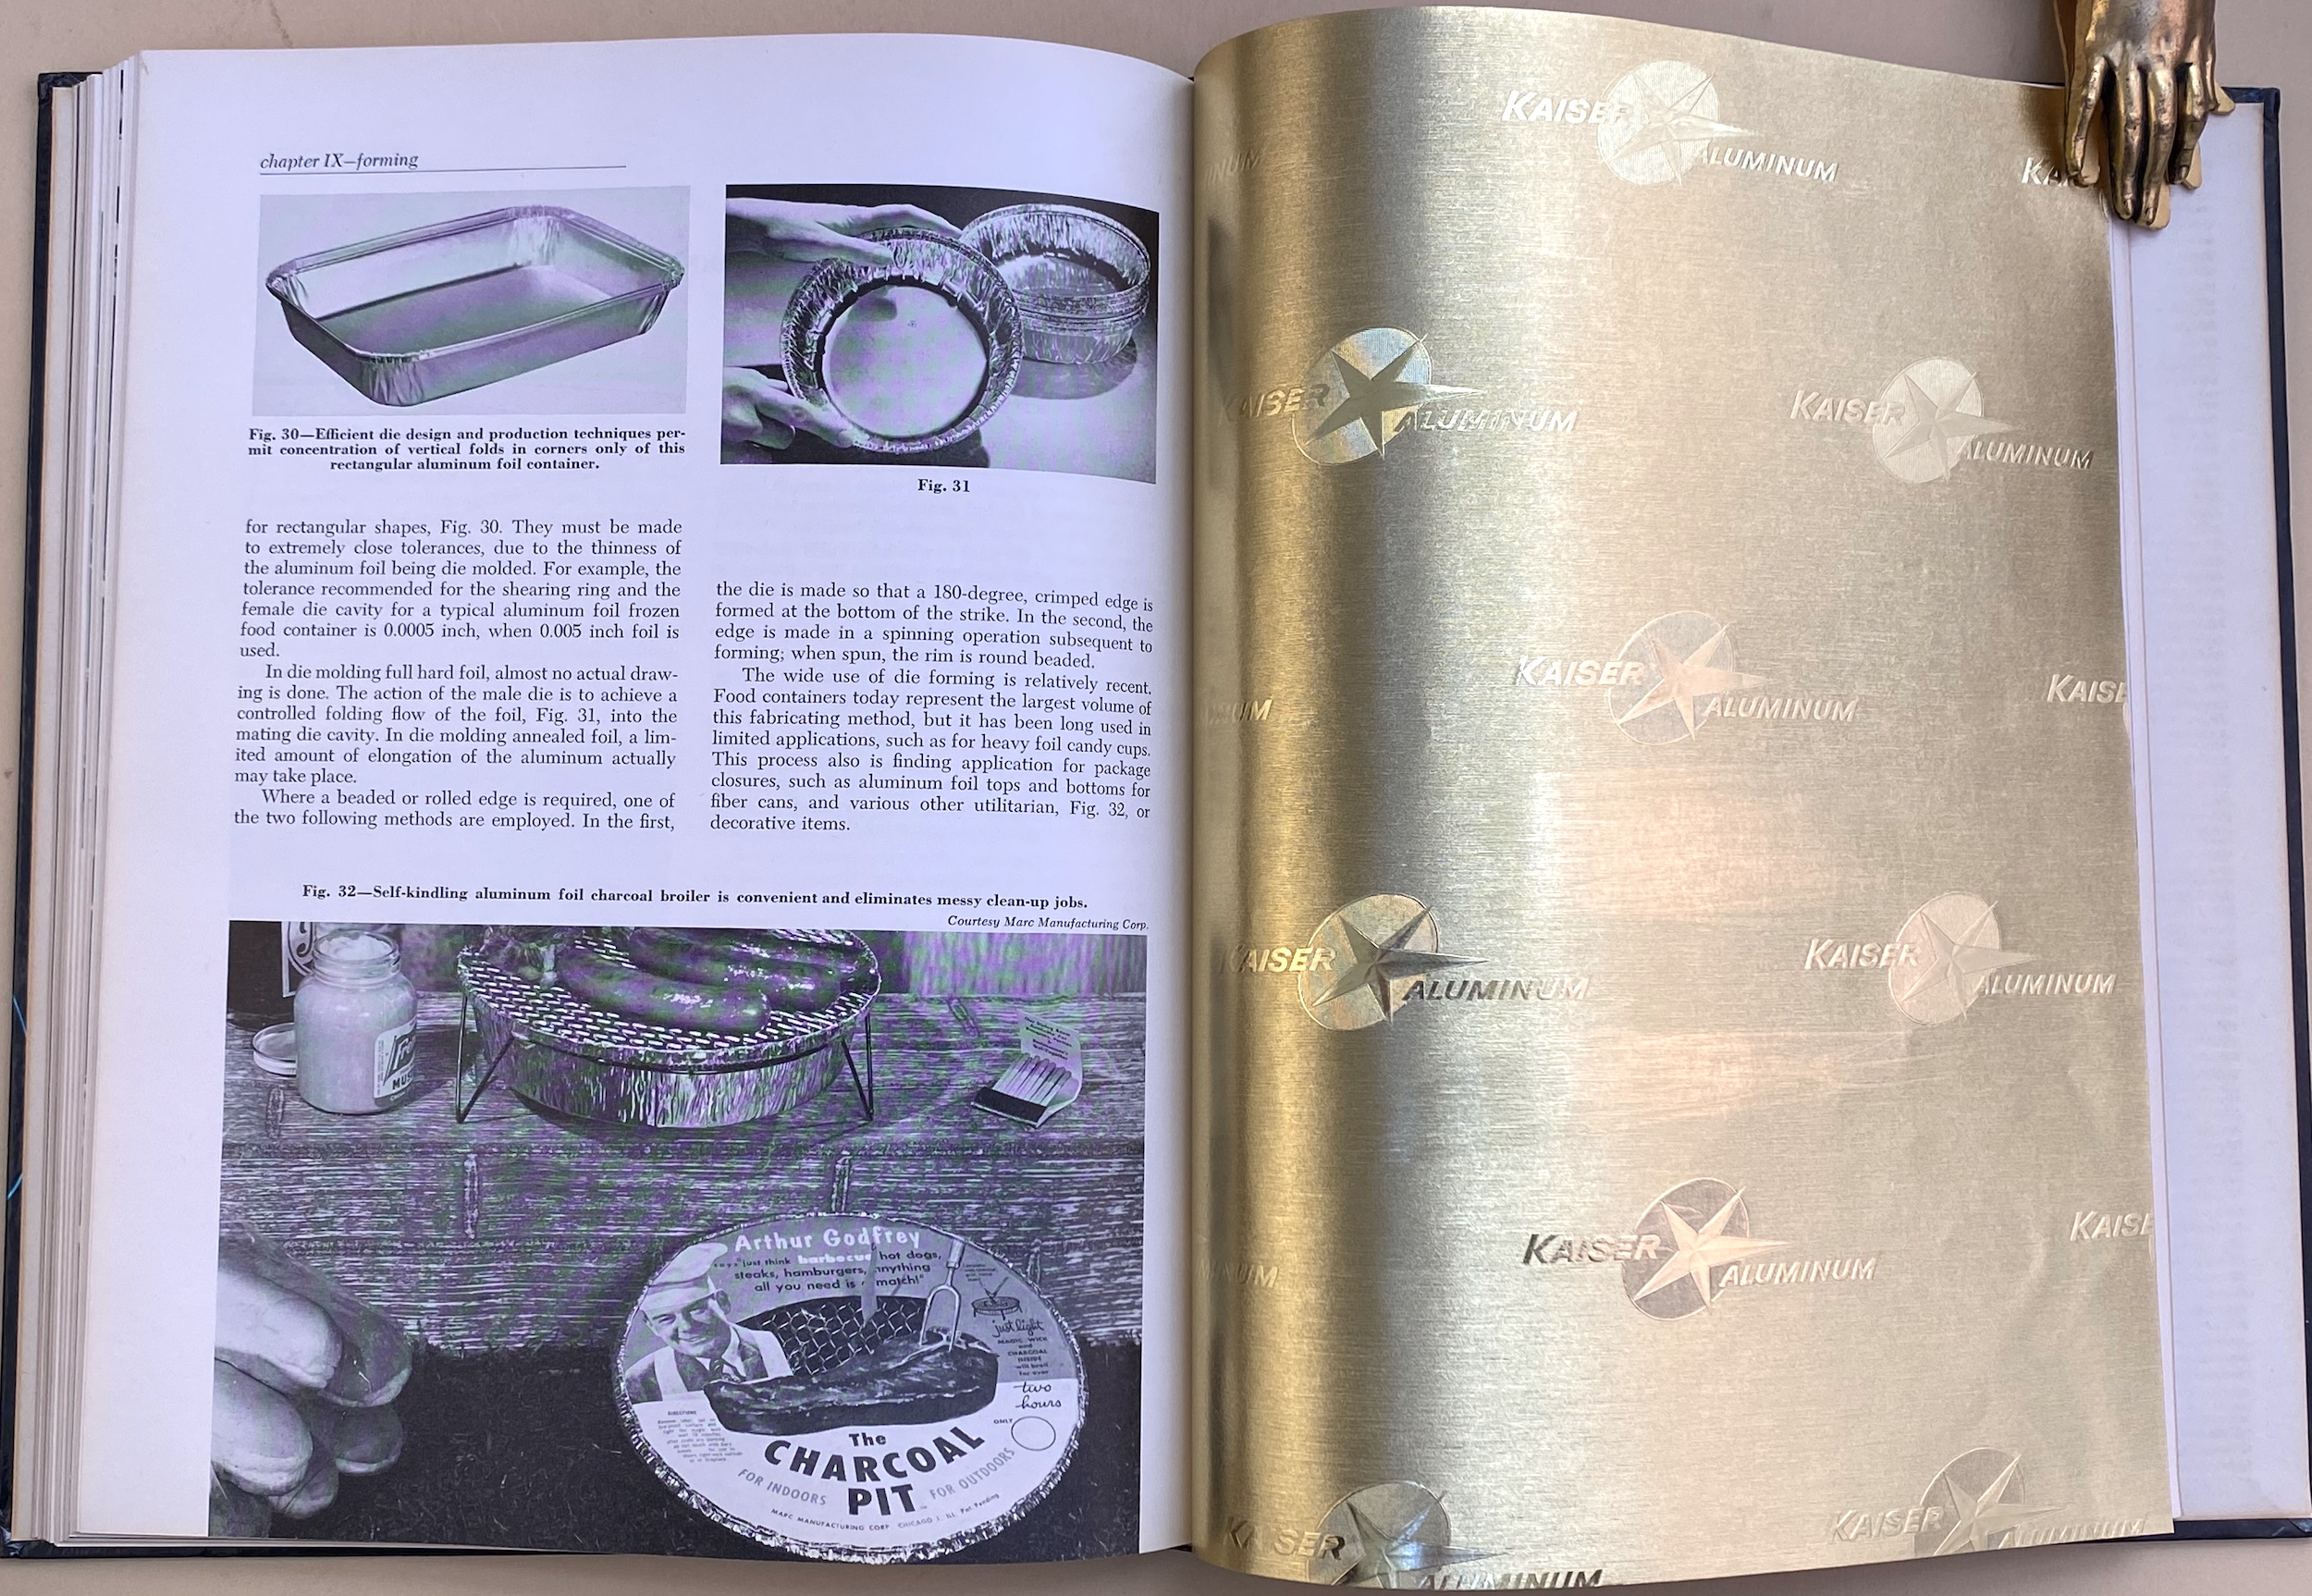 The page of aluminum foil printed to resemble gold was first laminated to paper before it embossed and bound into the volume.